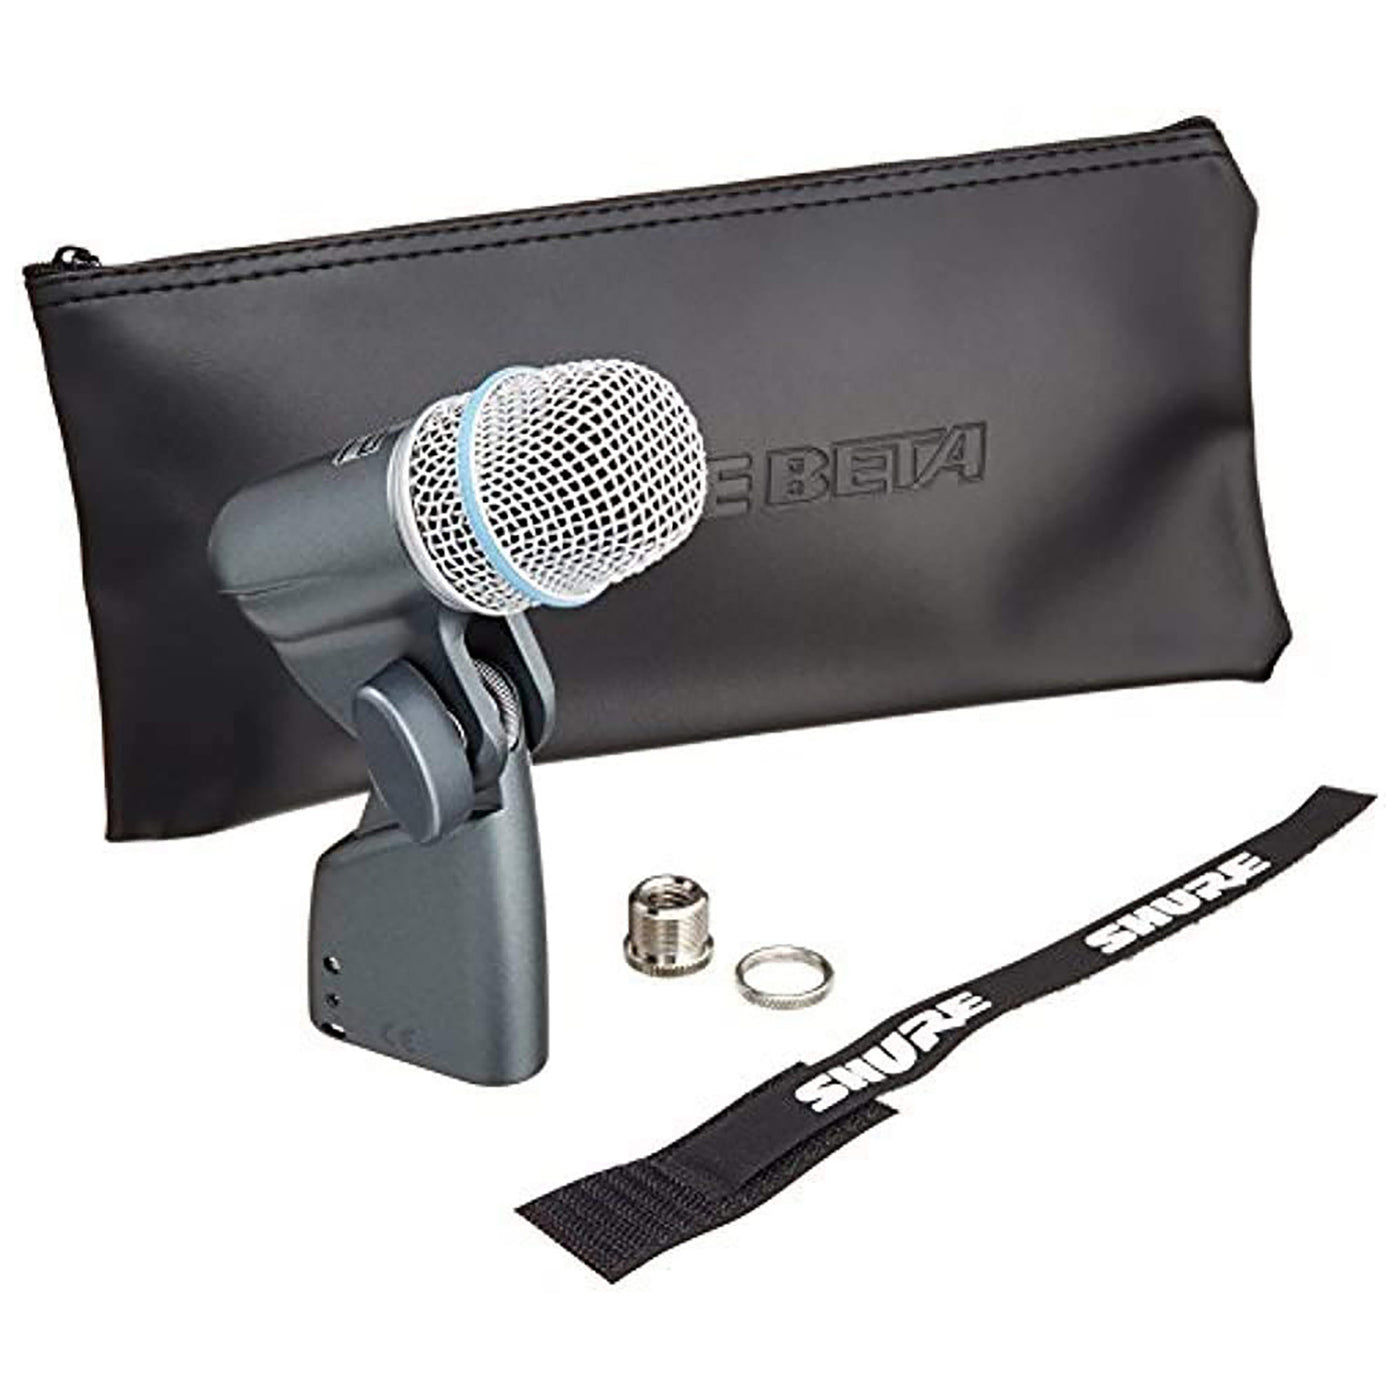 Shure BETA 56A Supercardioid Swivel-Mount Dynamic Microphone with High Output Neodymium Element for Vocal/Instrument Applications